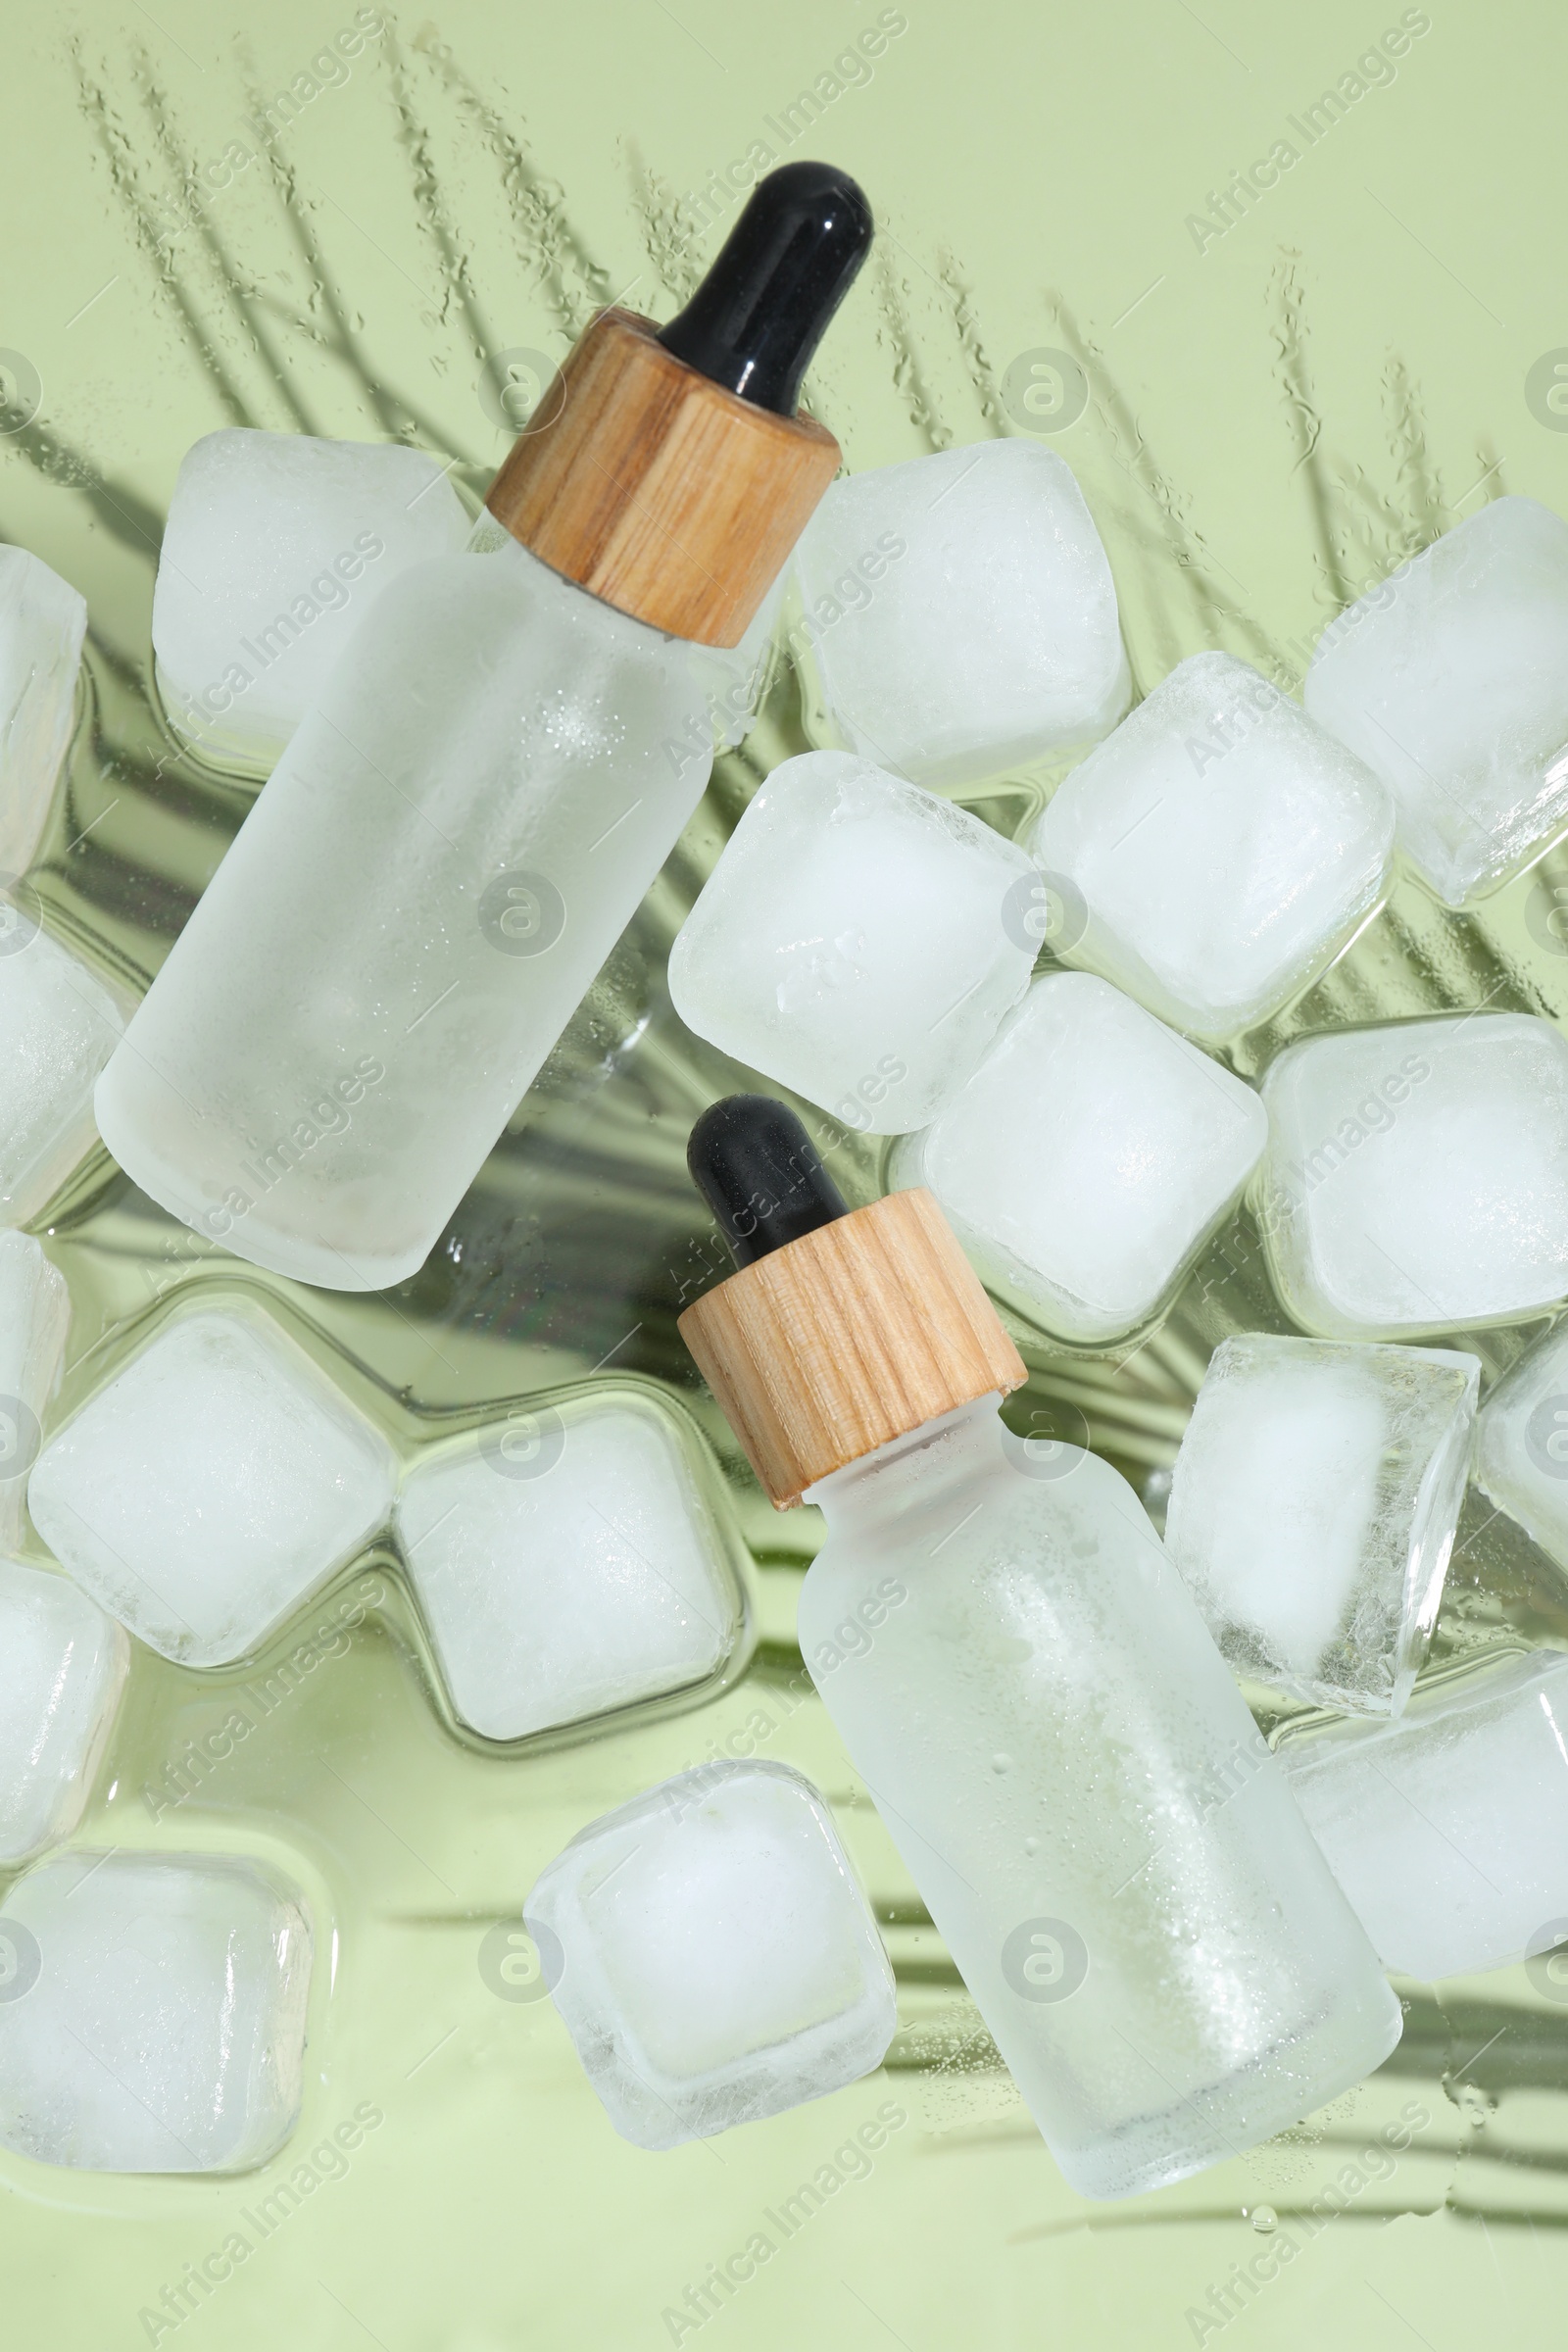 Photo of Bottles of cosmetic product and ice cubes on glass surface, flat lay